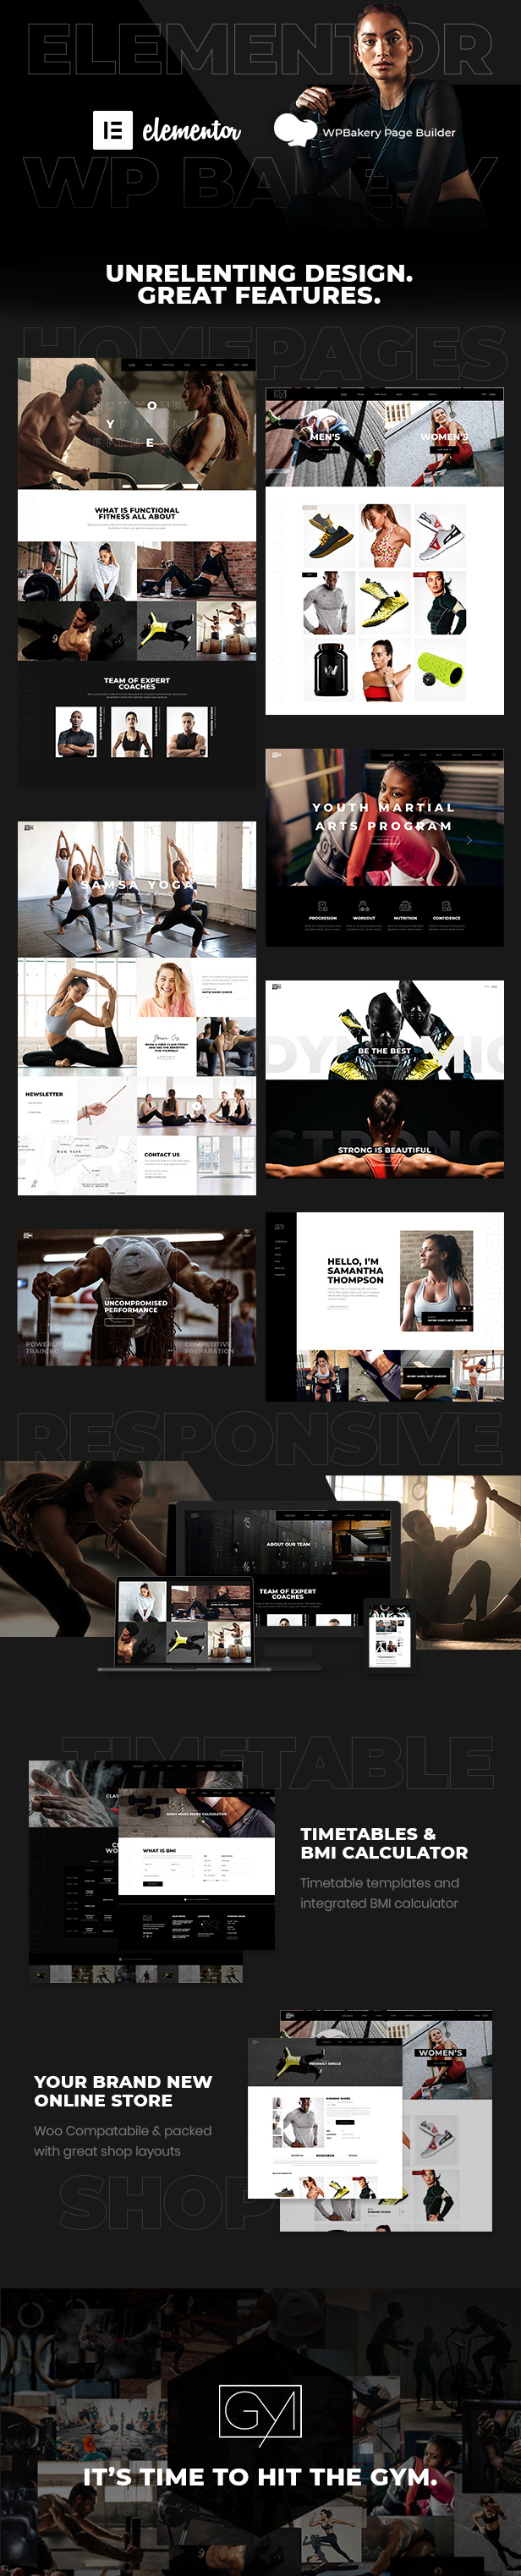 Powerlift - Fitness and Gym Theme - 2